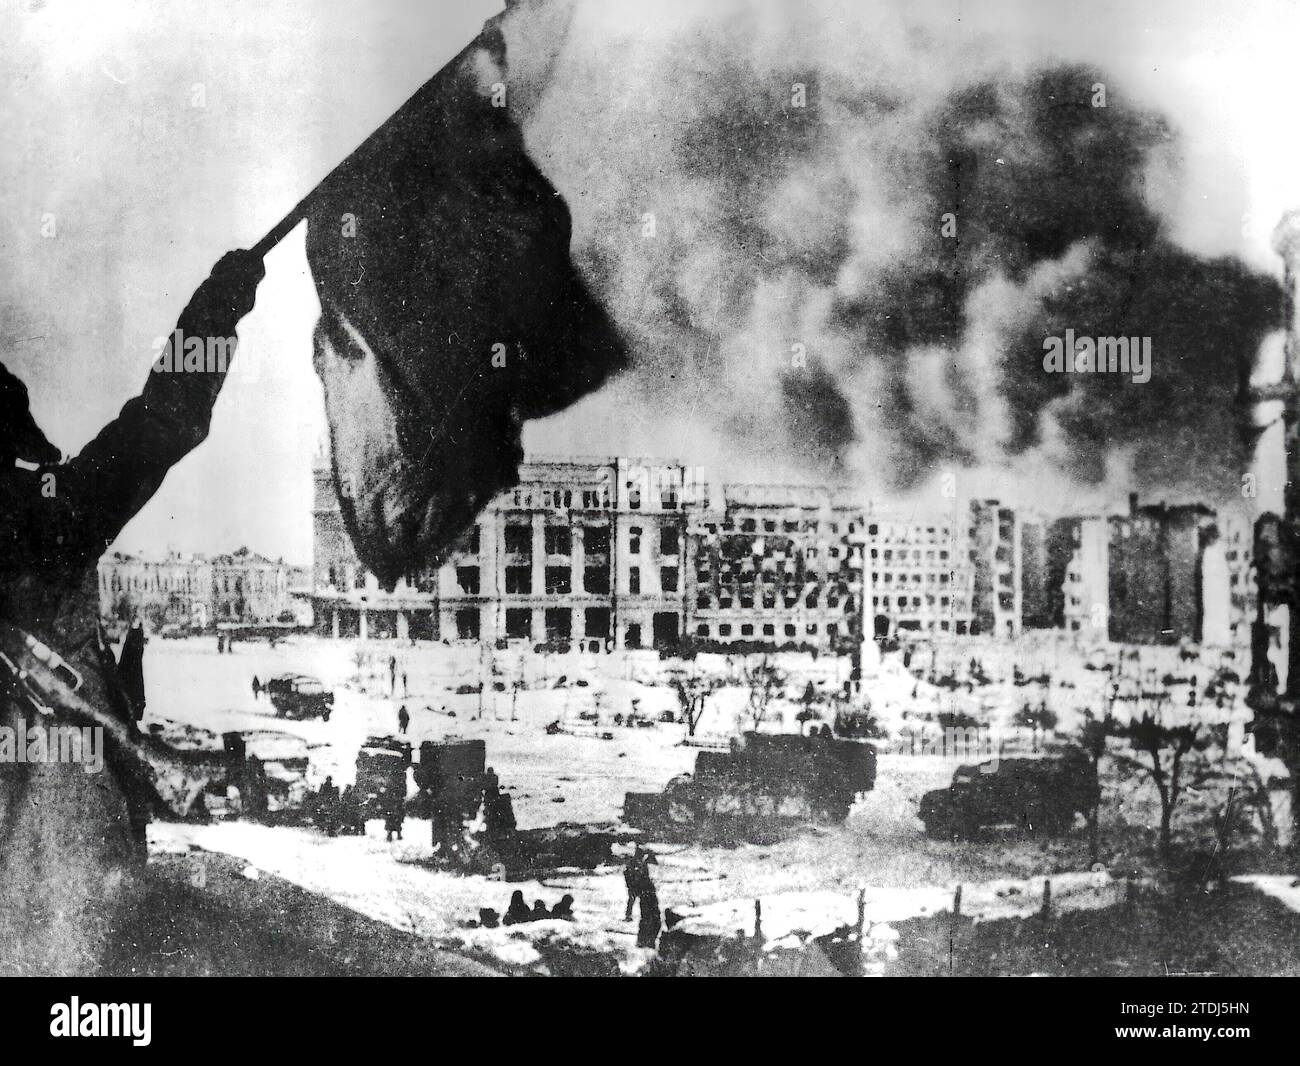 01/30/1943. Russian Troops Dominate Stalingrad. The Nazi flag stops flying. A Russian soldier shows it to his companions in front of the command post of the Sixth Army. Credit: Album / Archivo ABC Stock Photo